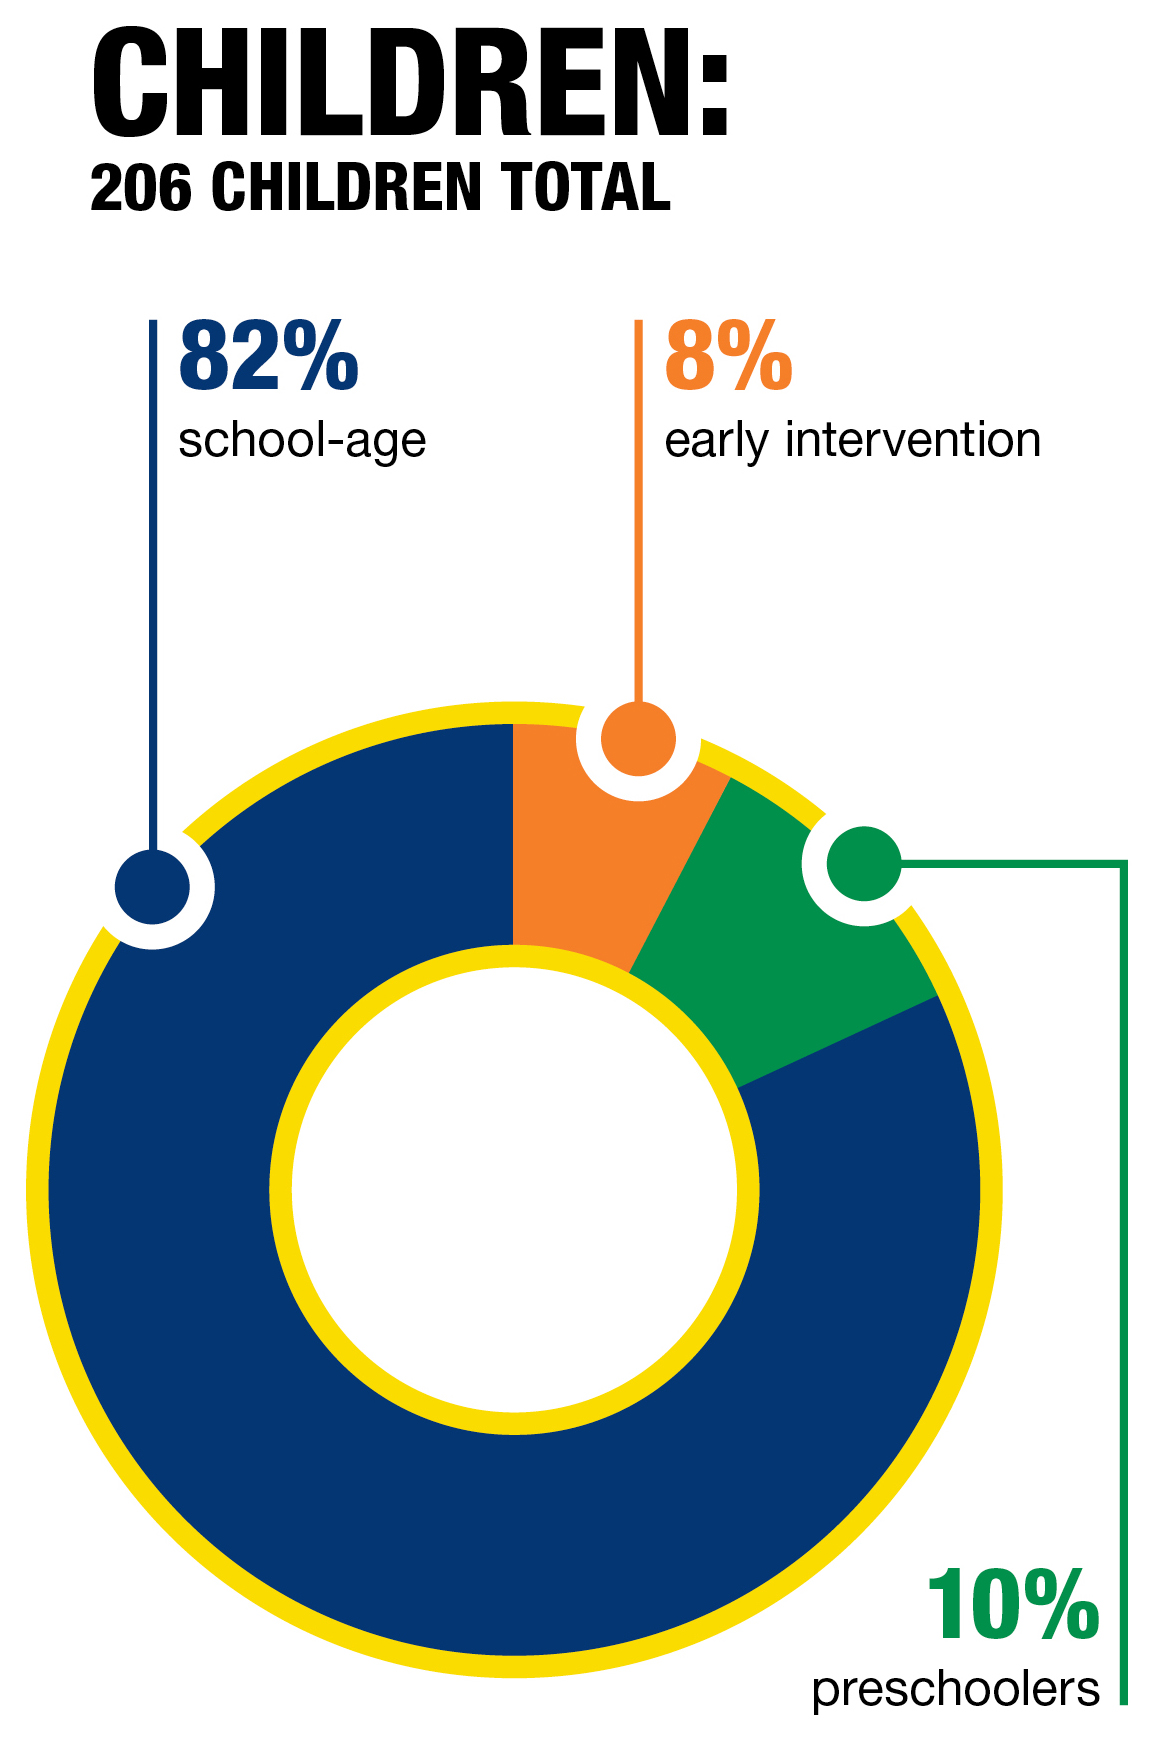 Pie chart showing the percentage breakdown of children represented in the study. There were 206 children total. 82% of participants’ children were school-age, 8% were in early intervention programs, and 10% were in preschool. 